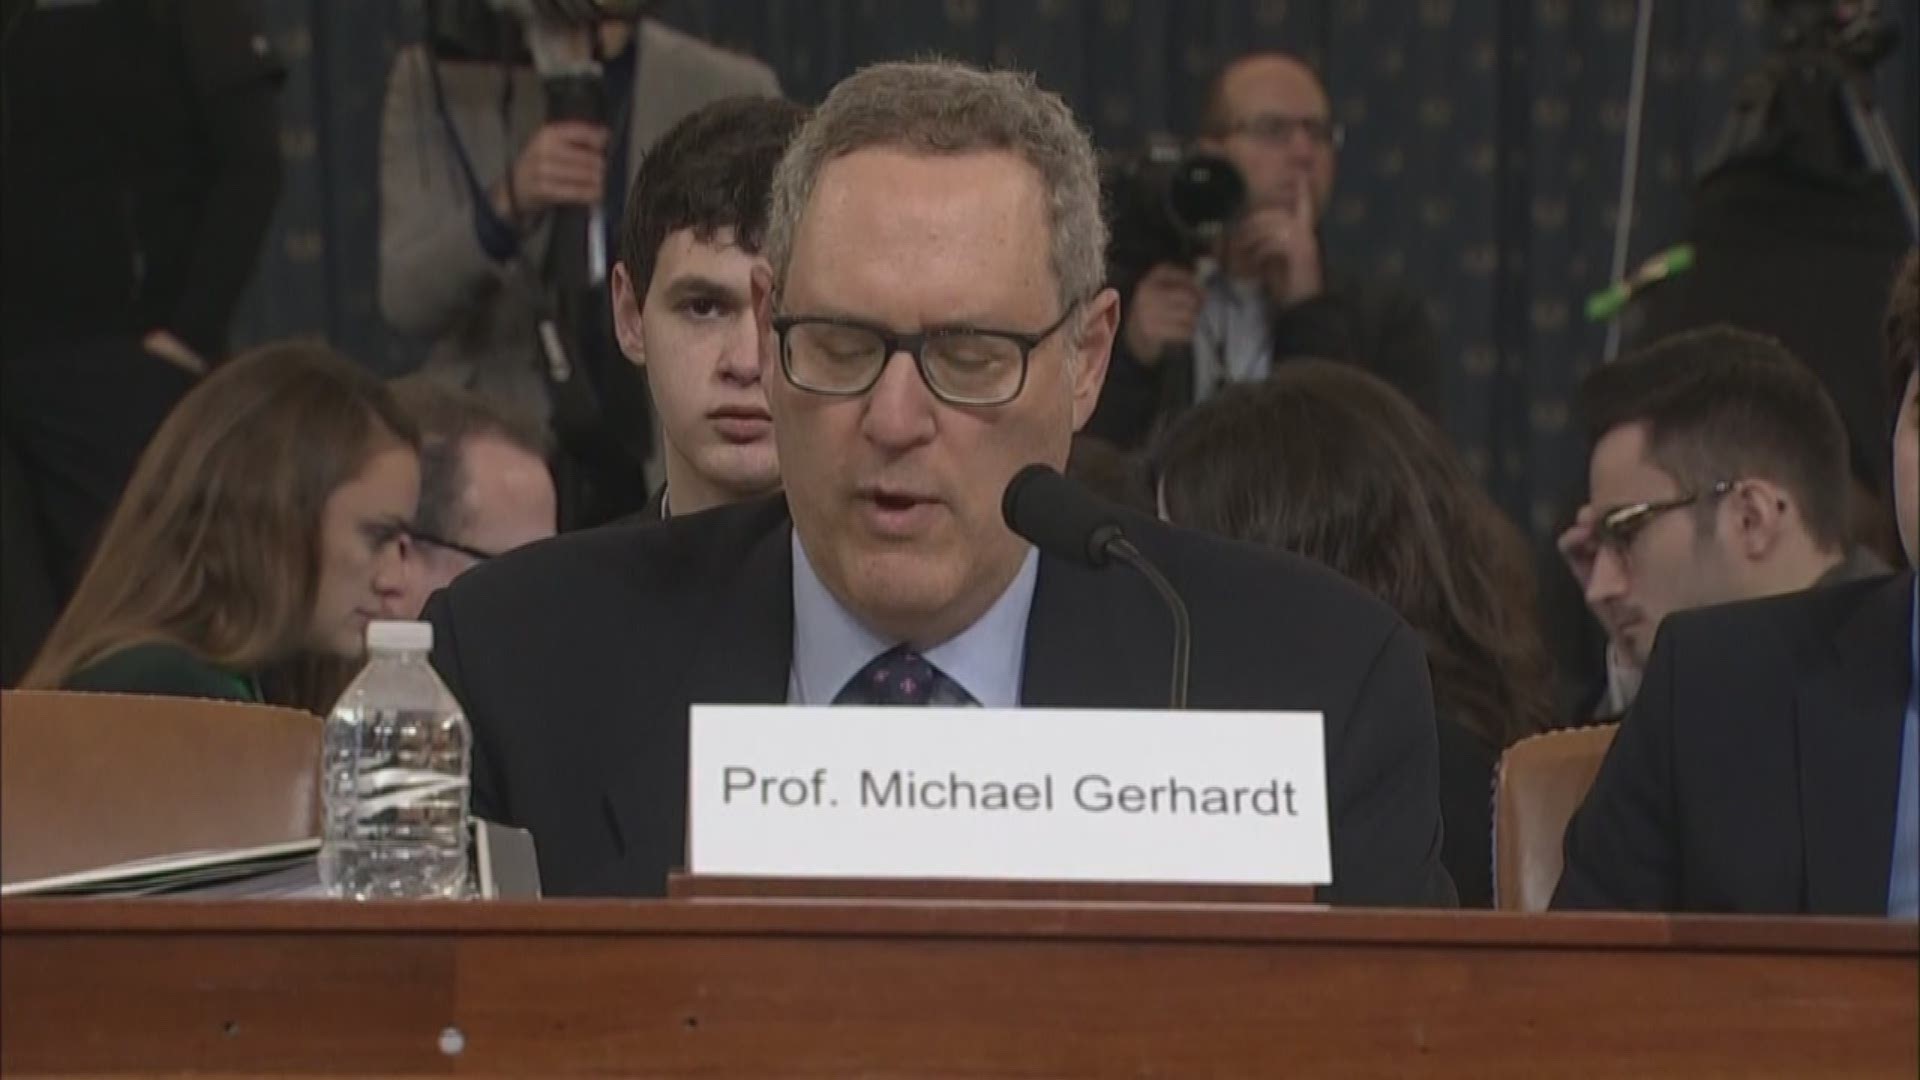 Gerhardt is a professor of Constitutional Law at the University of North Carolina, and testified at Bill Clinton's impeachment proceedings.